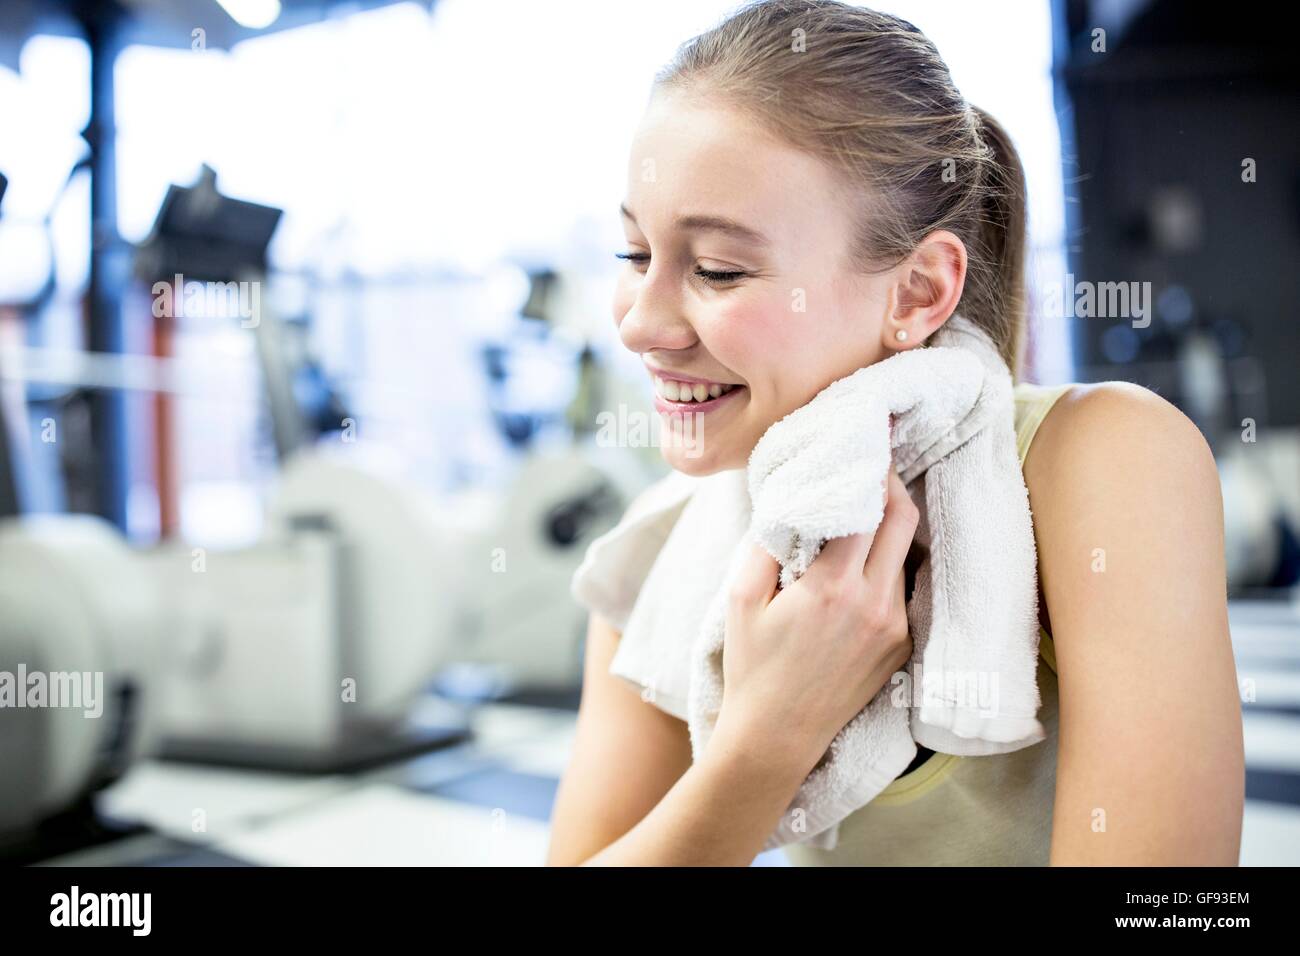 PROPERTY RELEASED. MODEL RELEASED. Young woman wiping her sweat with towel after exercising in gym. Stock Photo